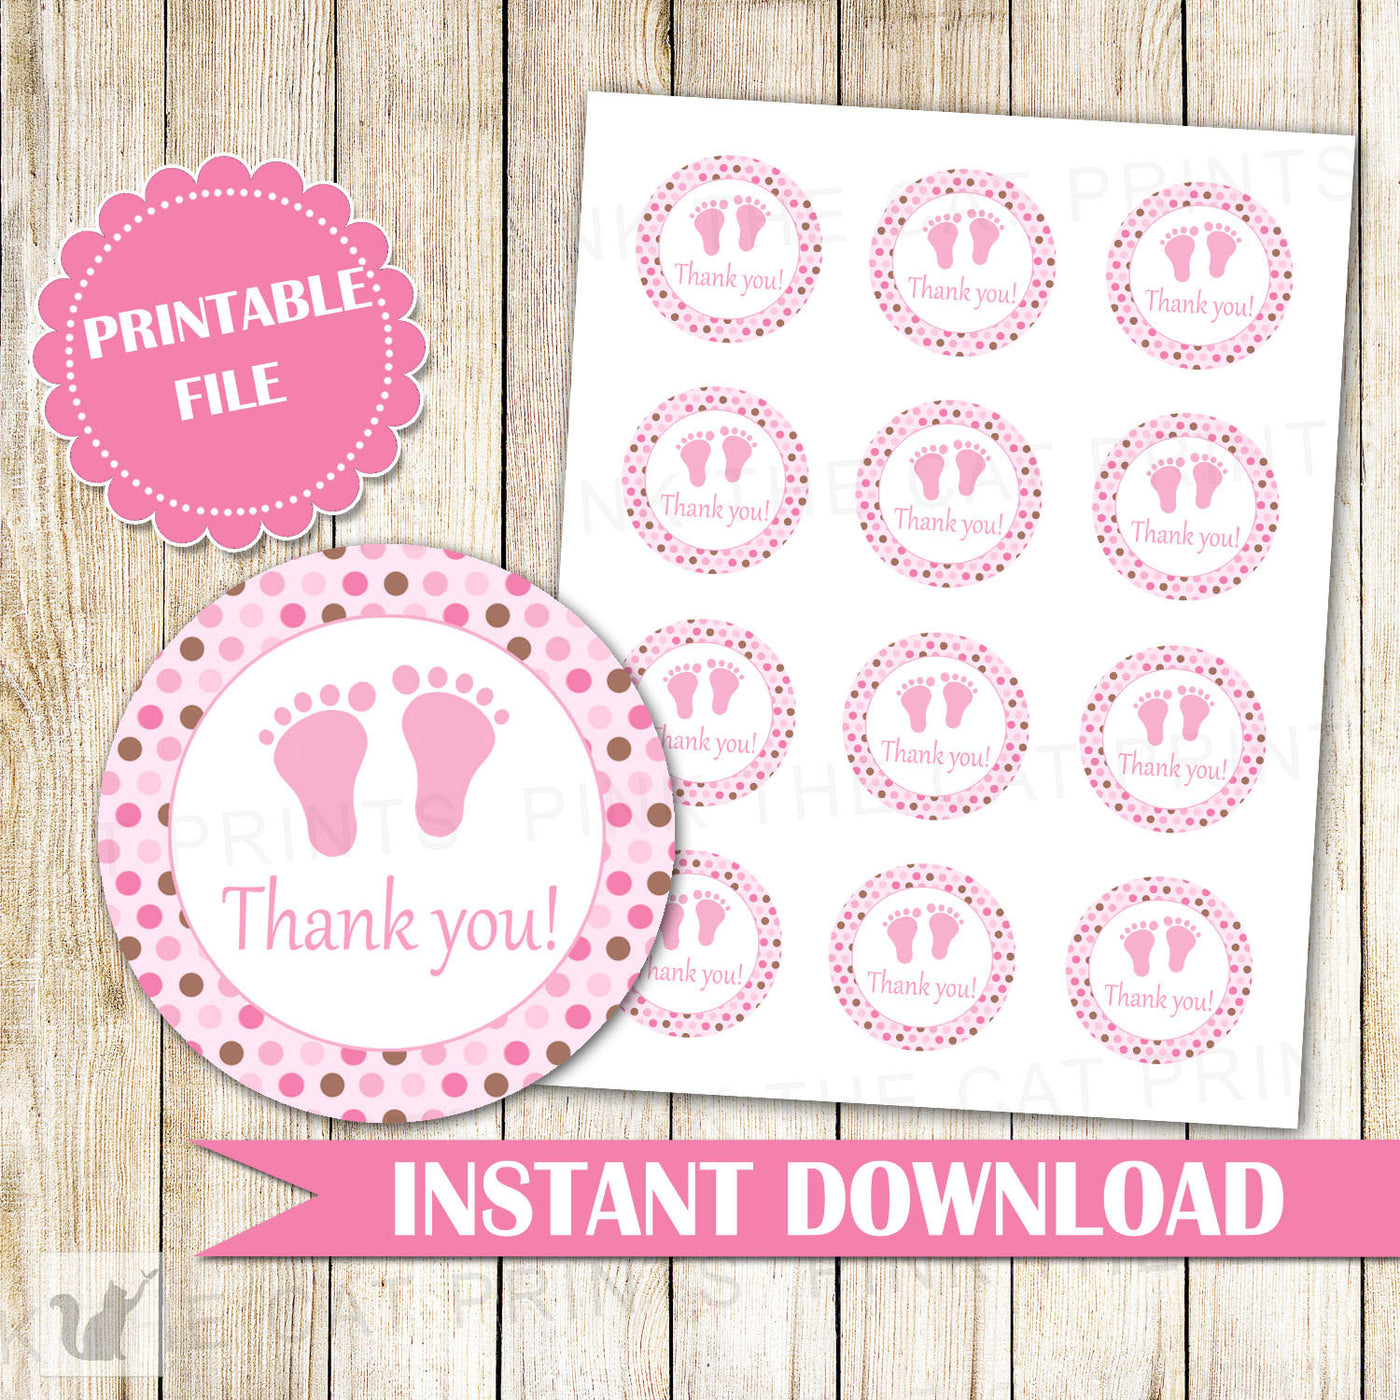 baby shower thank you tags wording